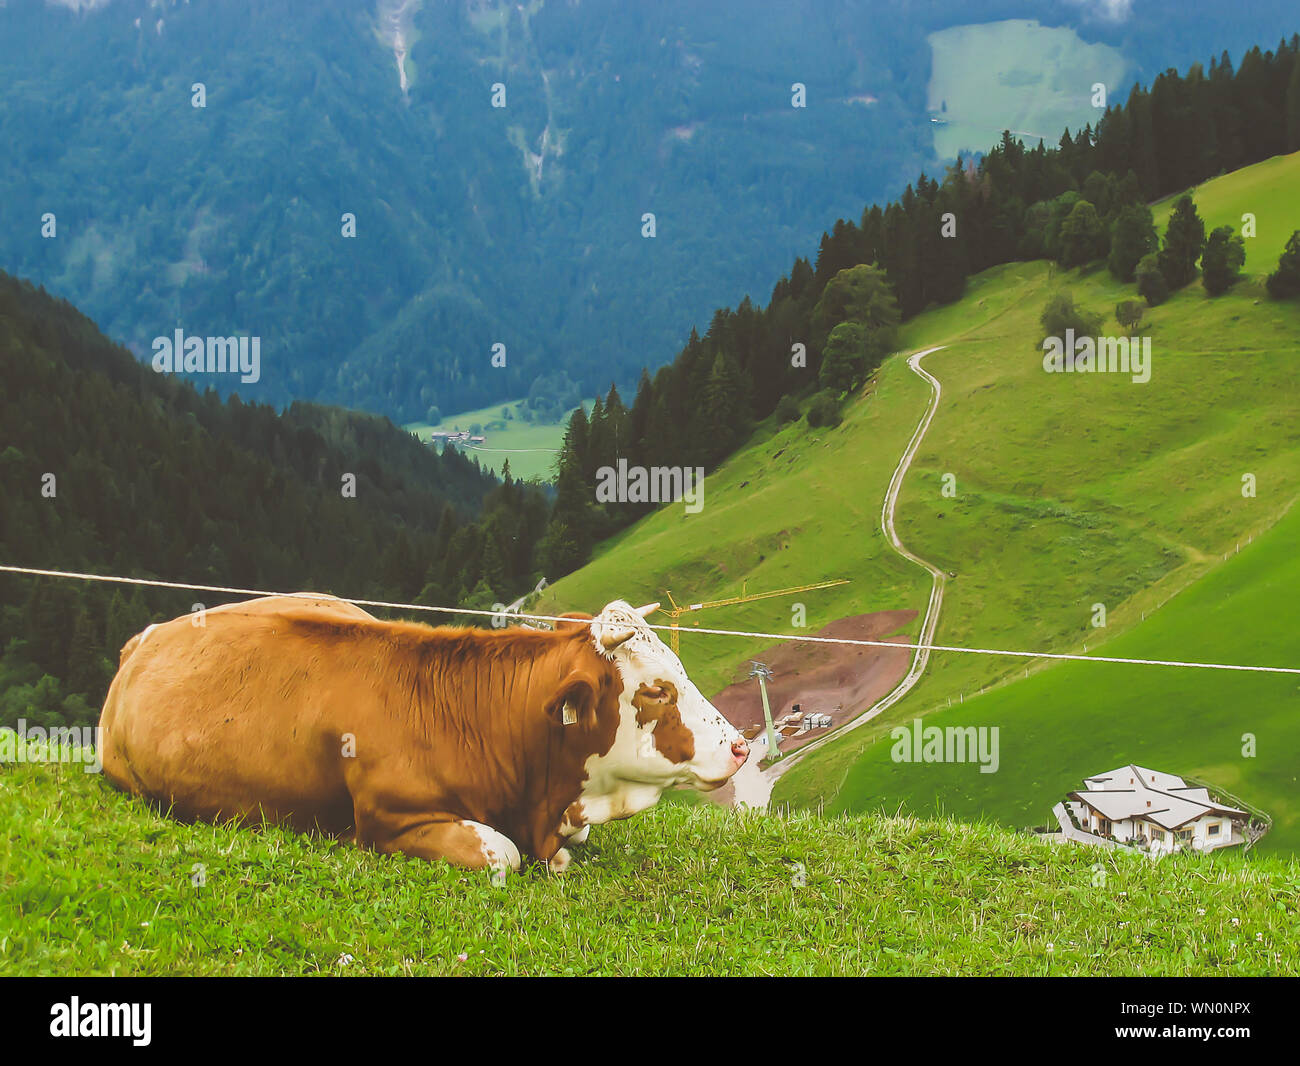 Cow Sitting On Grass Field Stock Photo